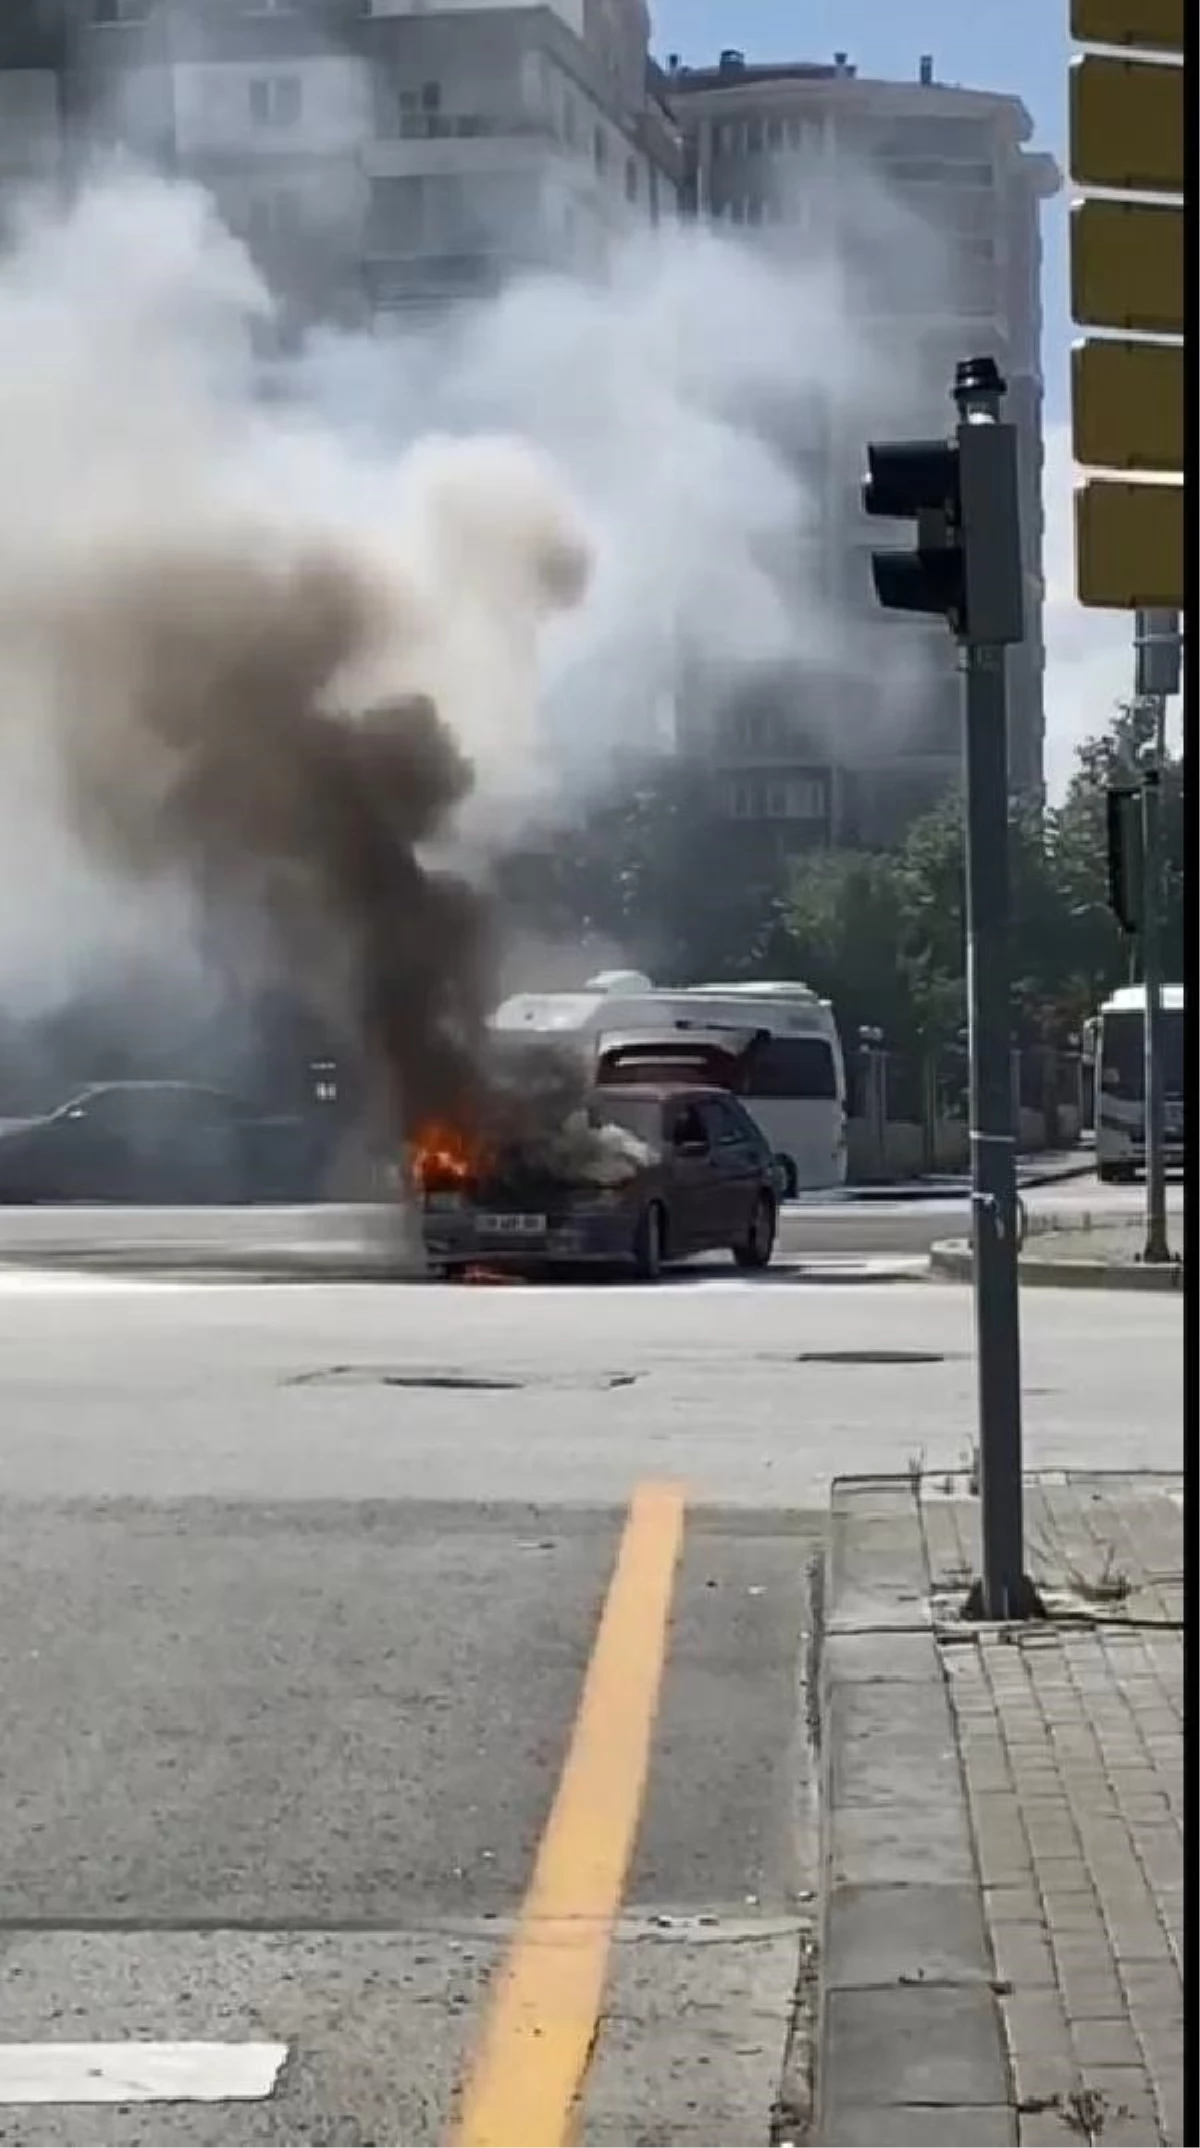 An automobile caught fire while waiting at a red light in Ankara